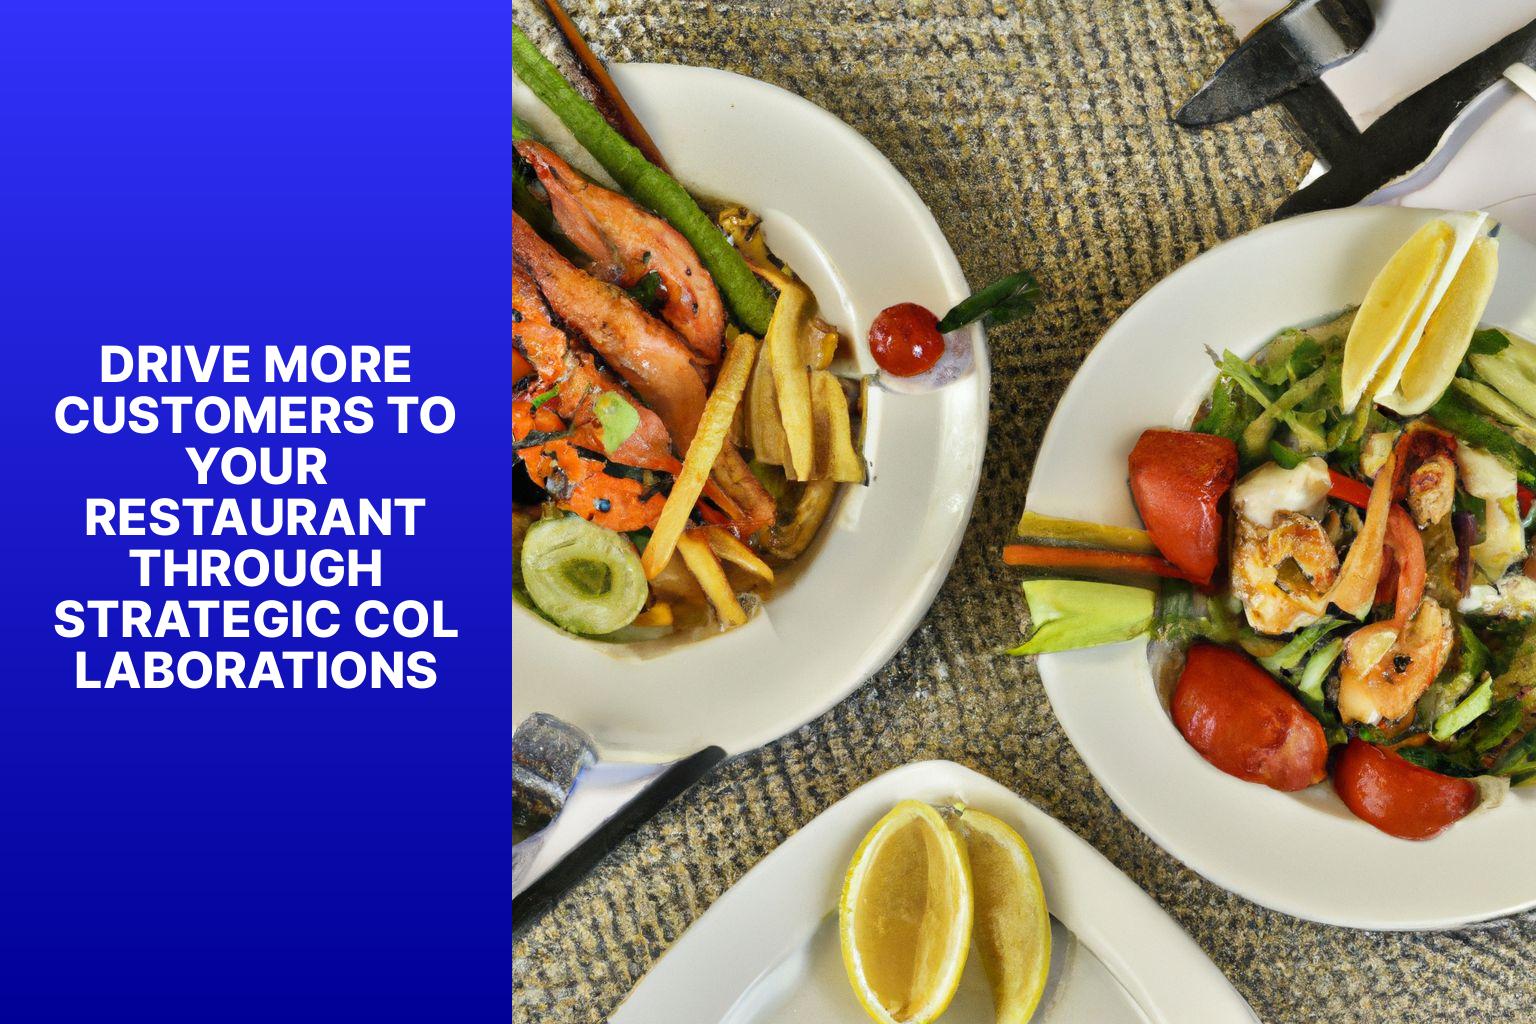 Drive More Customers to Your Restaurant through Strategic Collaborations